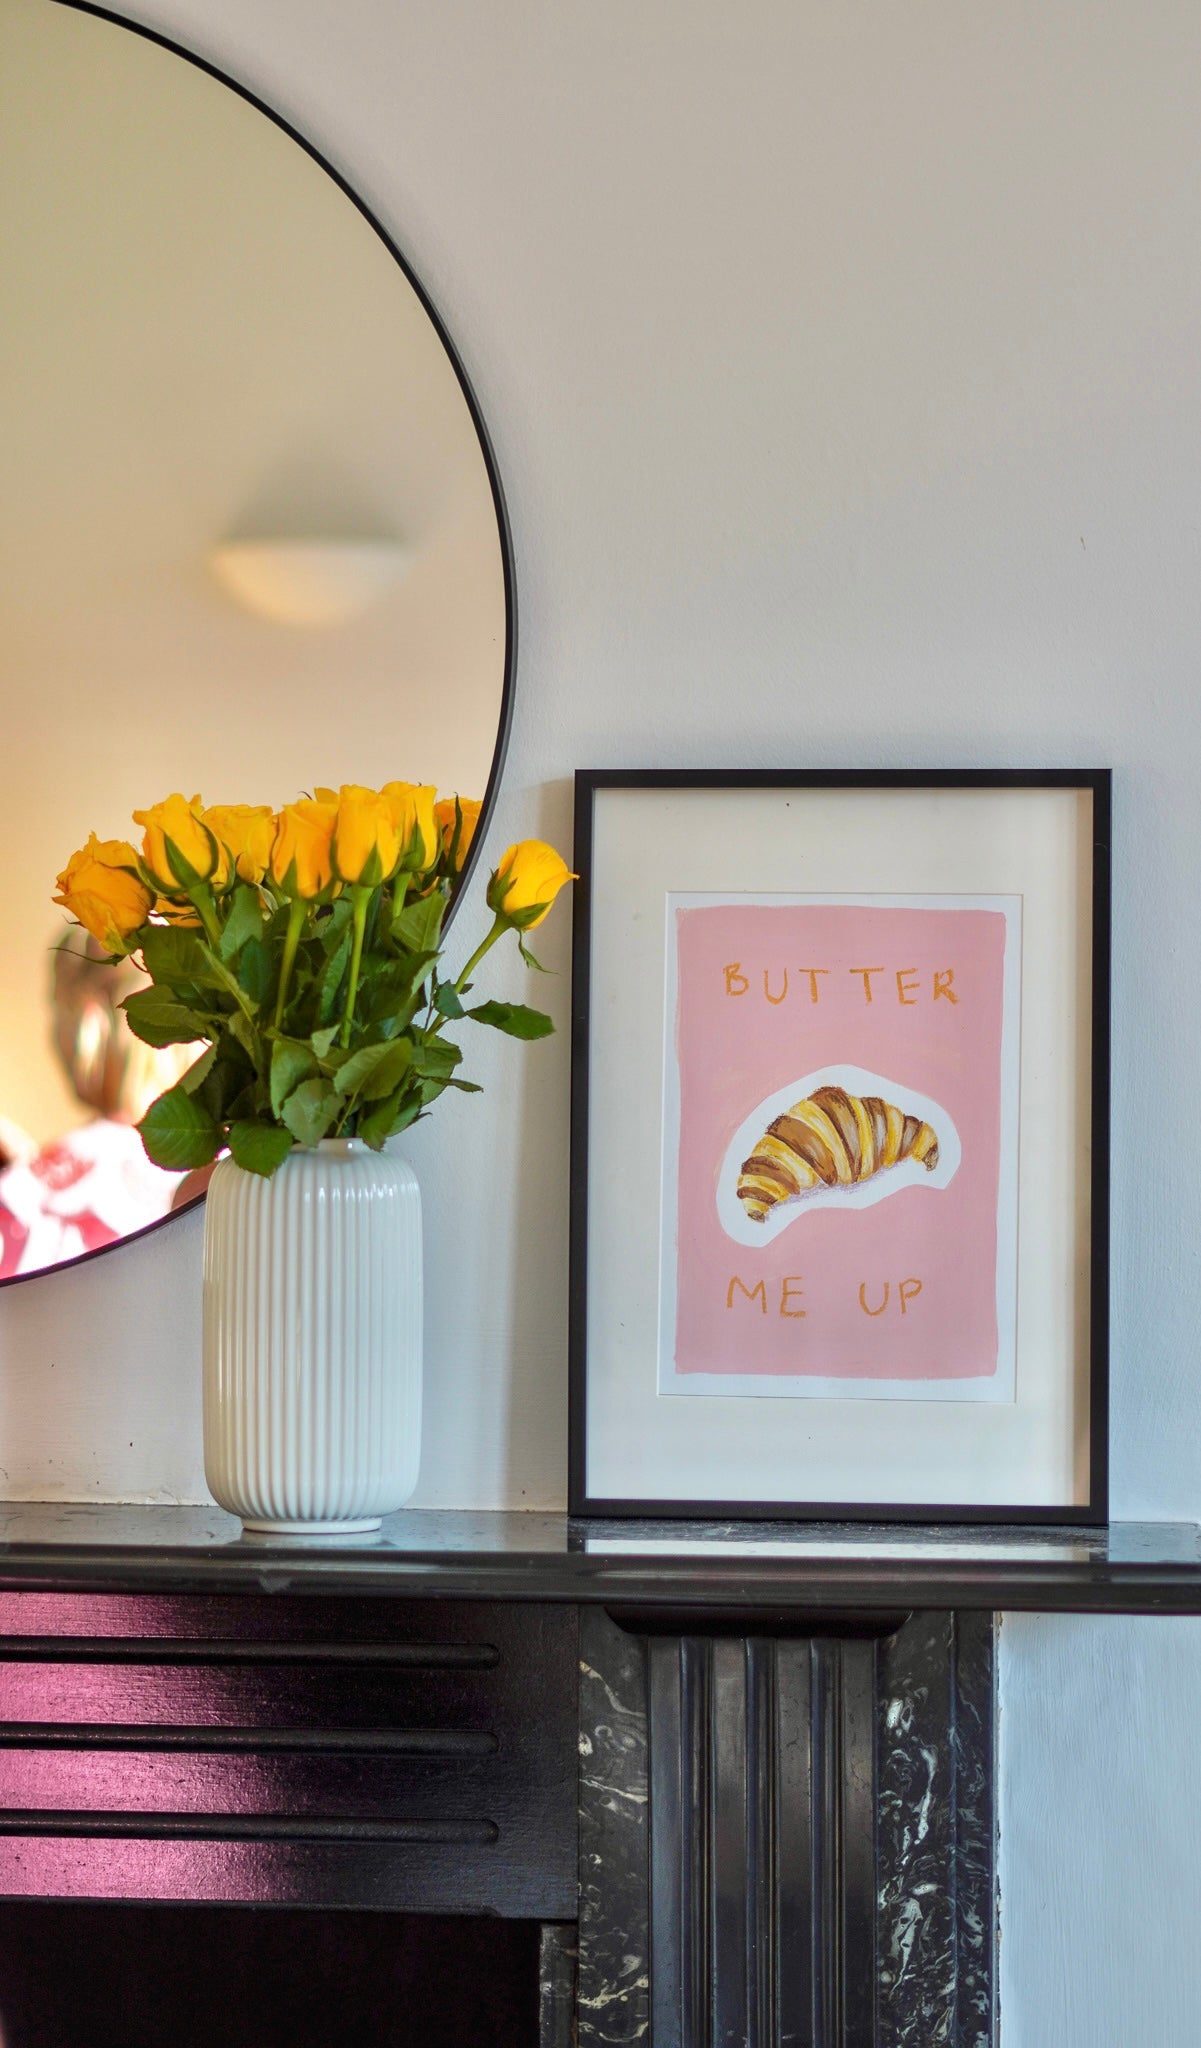 Butter Me Up print